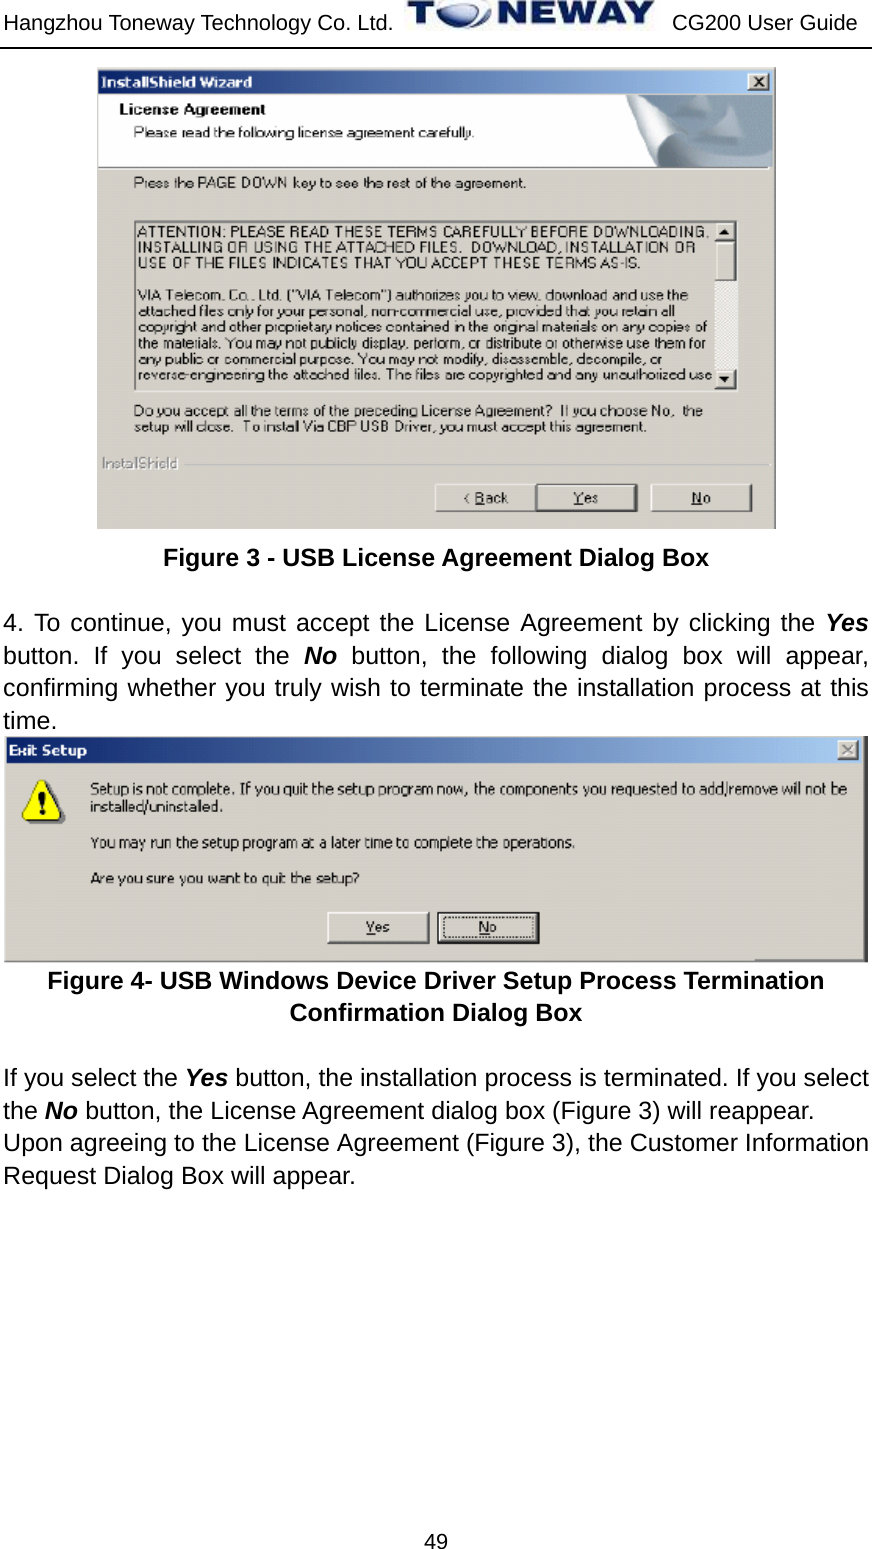 Hangzhou Toneway Technology Co. Ltd.    CG200 User Guide 49  Figure 3 - USB License Agreement Dialog Box  4. To continue, you must accept the License Agreement by clicking the Yes button. If you select the No button, the following dialog box will appear, confirming whether you truly wish to terminate the installation process at this time.  Figure 4- USB Windows Device Driver Setup Process Termination Confirmation Dialog Box  If you select the Yes button, the installation process is terminated. If you select the No button, the License Agreement dialog box (Figure 3) will reappear. Upon agreeing to the License Agreement (Figure 3), the Customer Information Request Dialog Box will appear. 